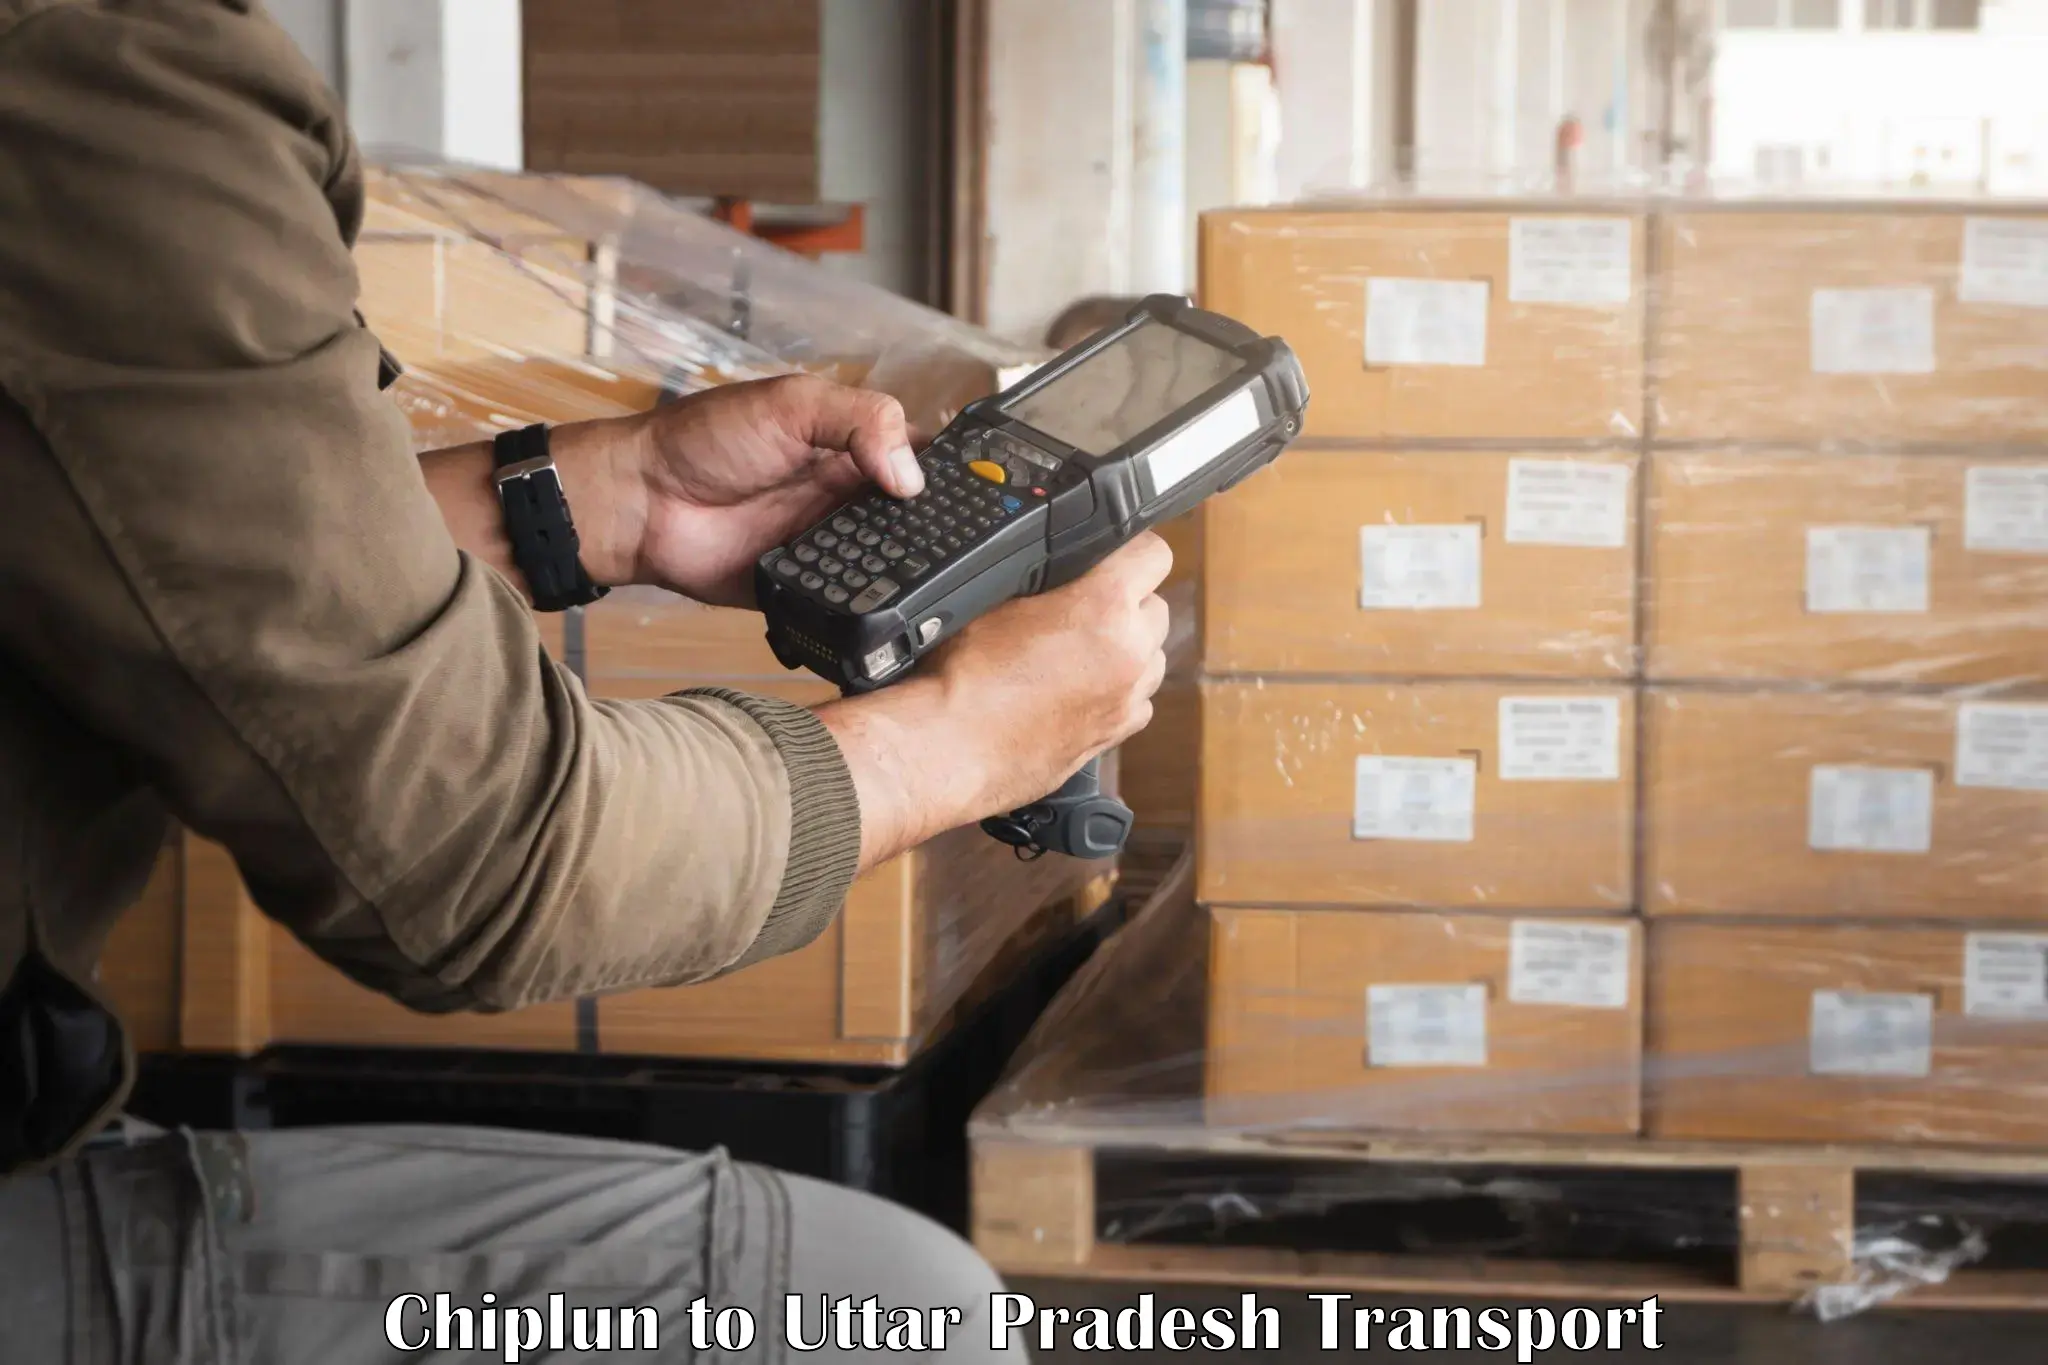 Pick up transport service in Chiplun to Rudhauli